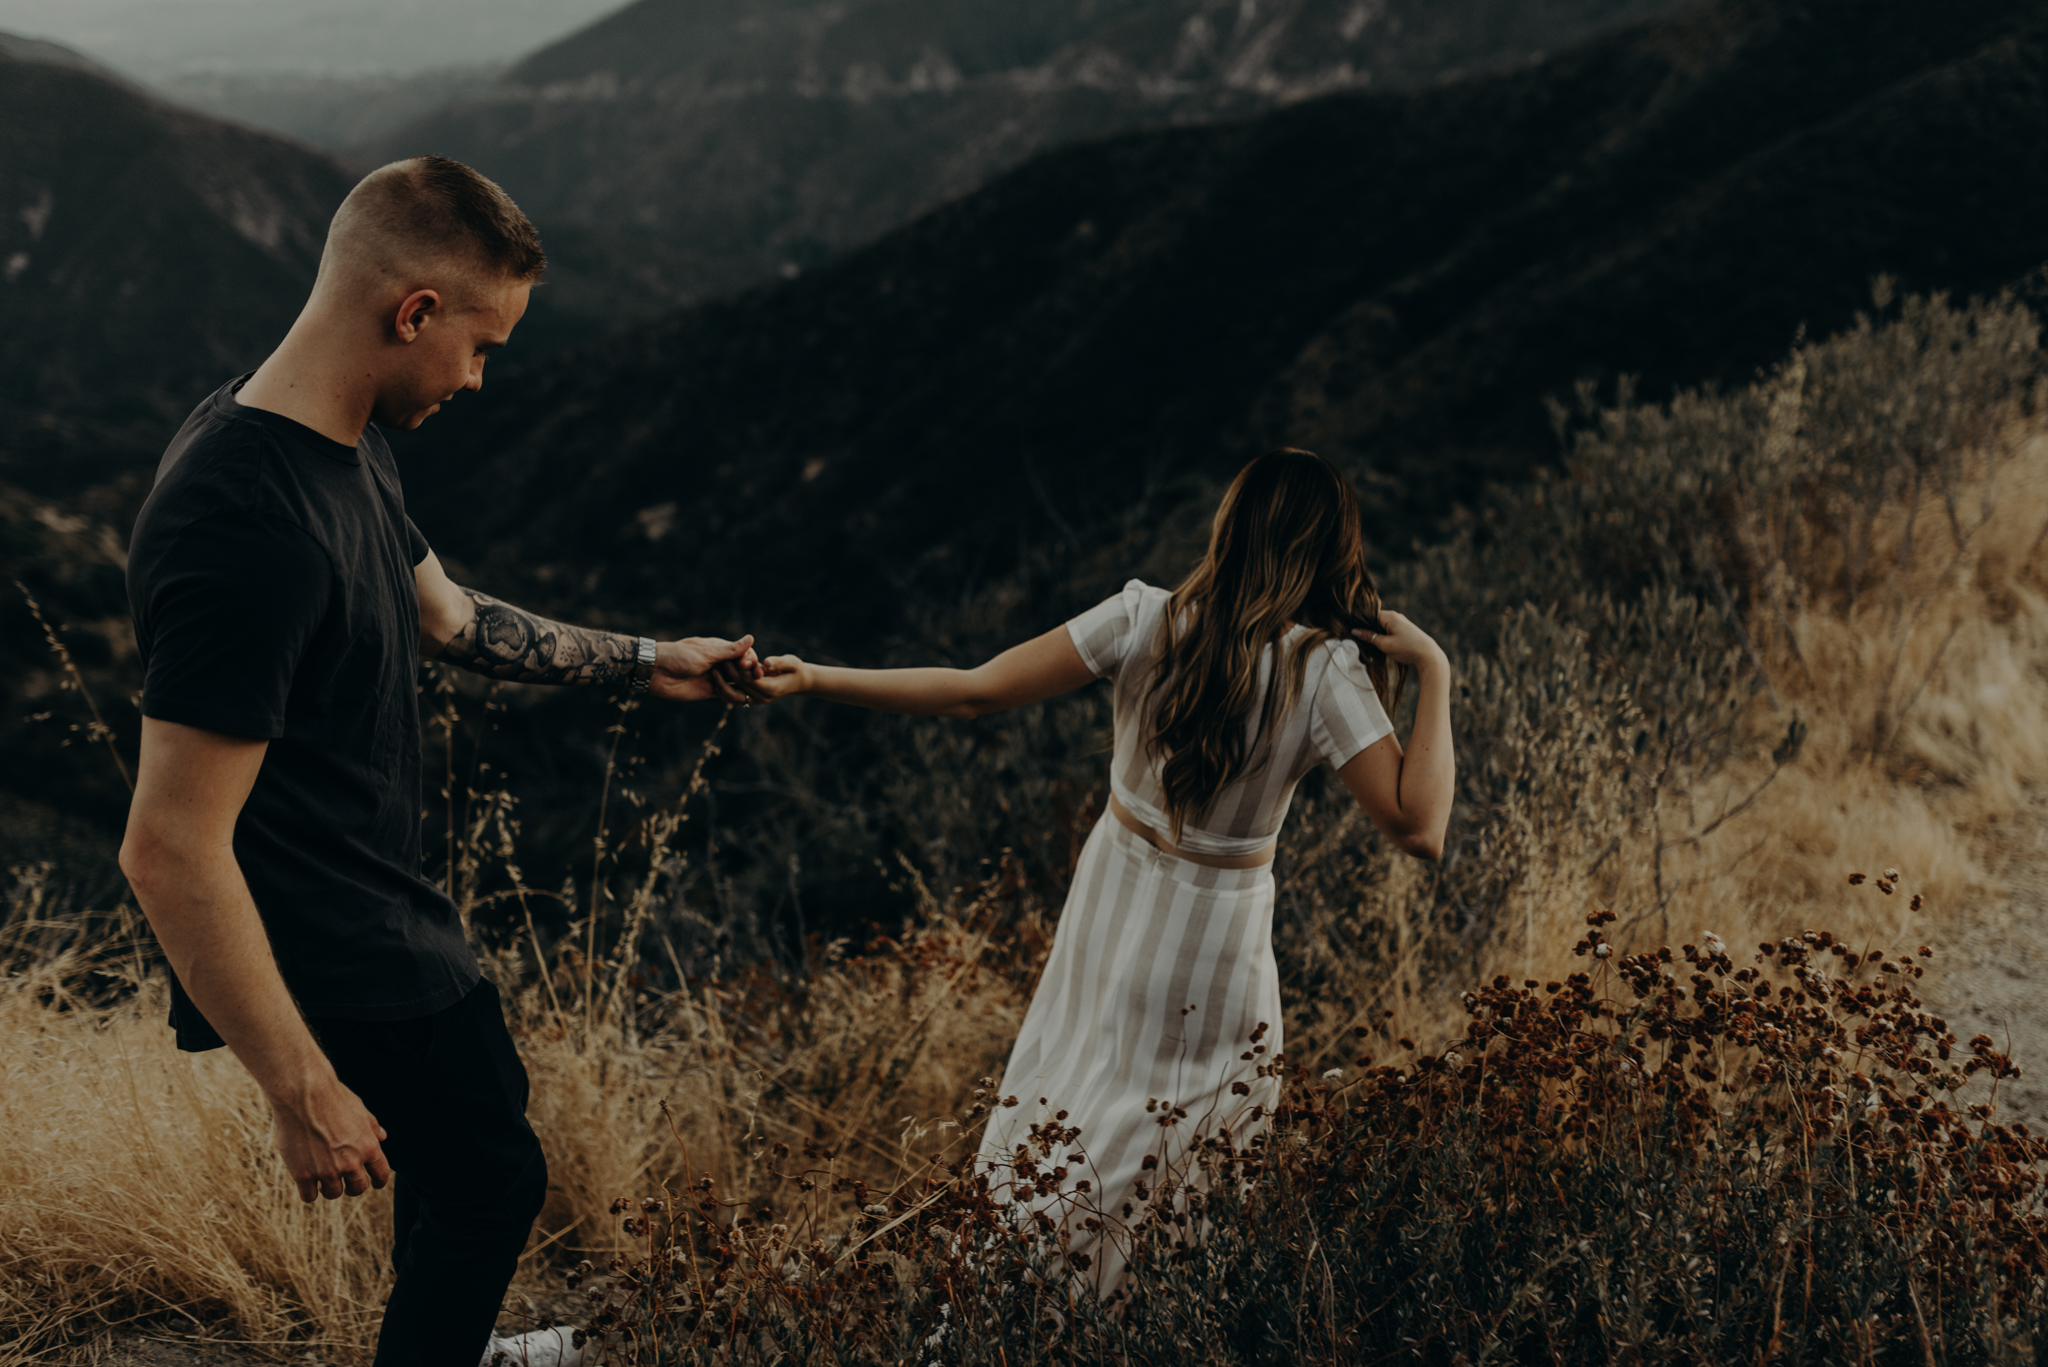 Isaiah + Taylor Photography - Los Angeles Forest Engagement Session - Laid back wedding photographer-017.jpg